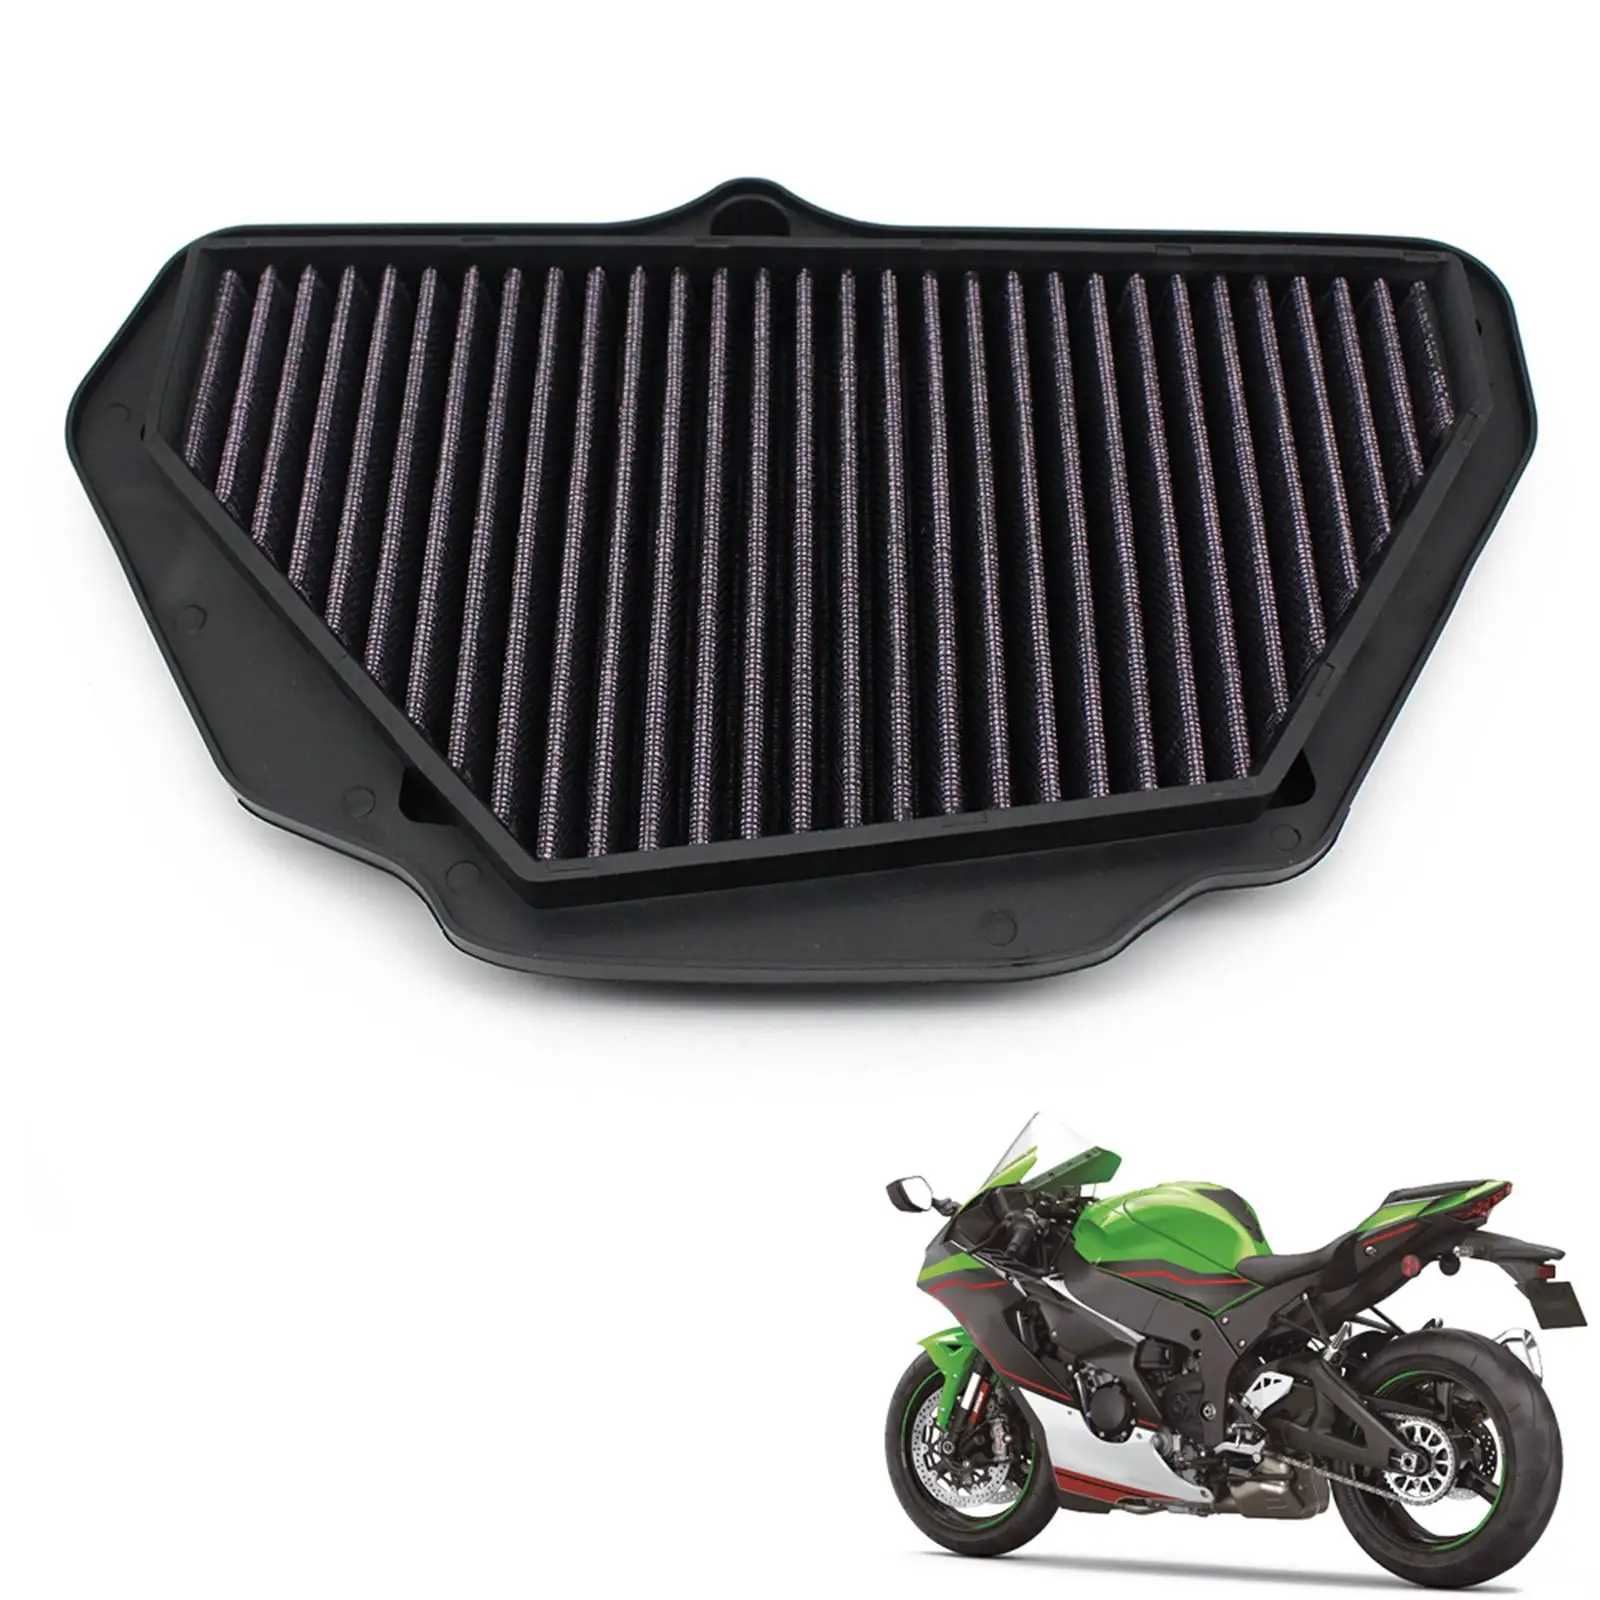 Motorcycle Air Filter Replaces Portable Motorcycle Accessories Practical